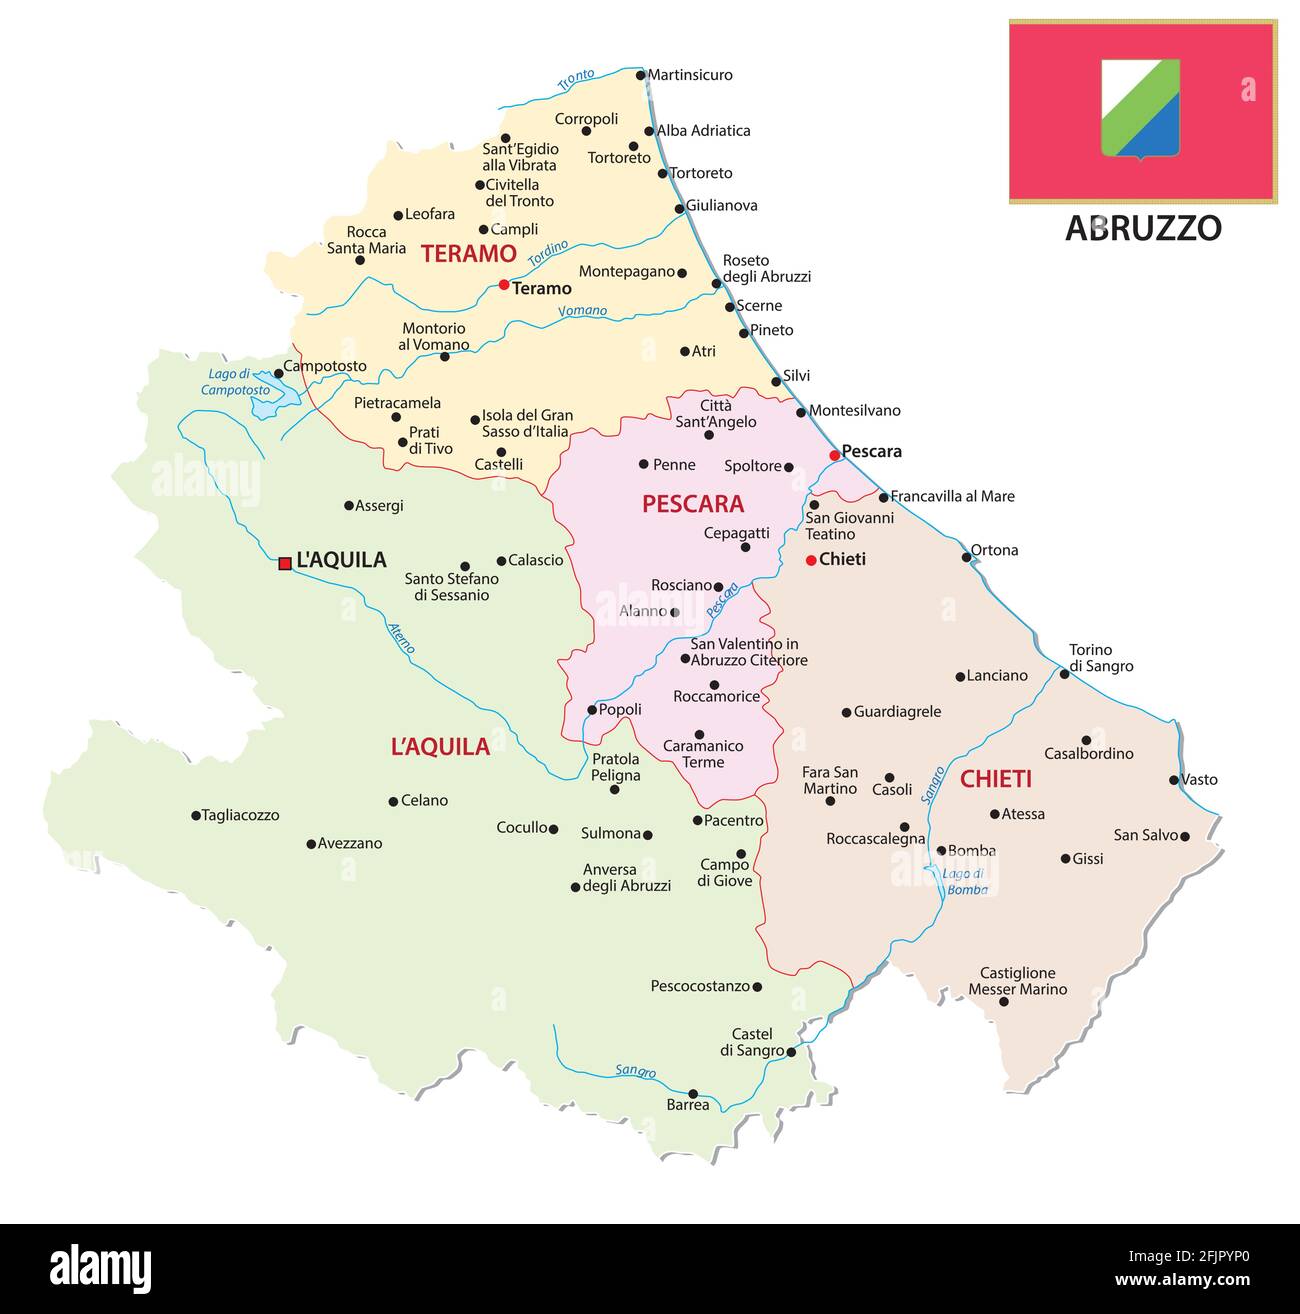 Abruzzo Administrative And Political Map With Flag 2FJPYP0 